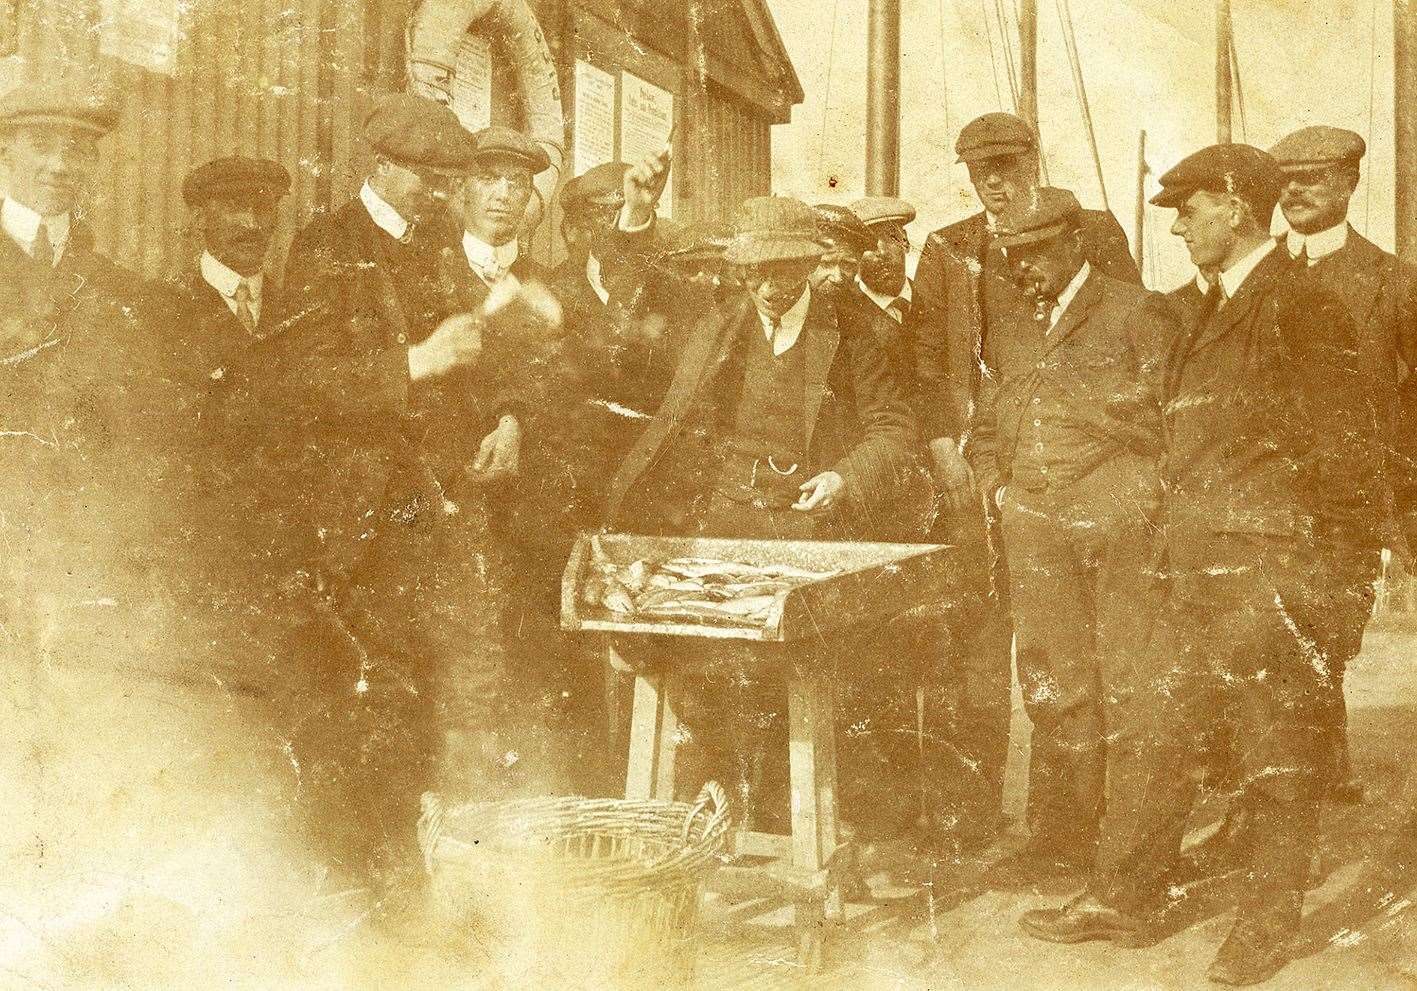 We think this photo of a herring auction on the Wick quayside was taken in about 1910. A sample of fish from one boat’s catch is on the table and the auctioneer, hand raised, is calling for bids for the whole catch from the onlooking fishcurers. (Andy Anderson)